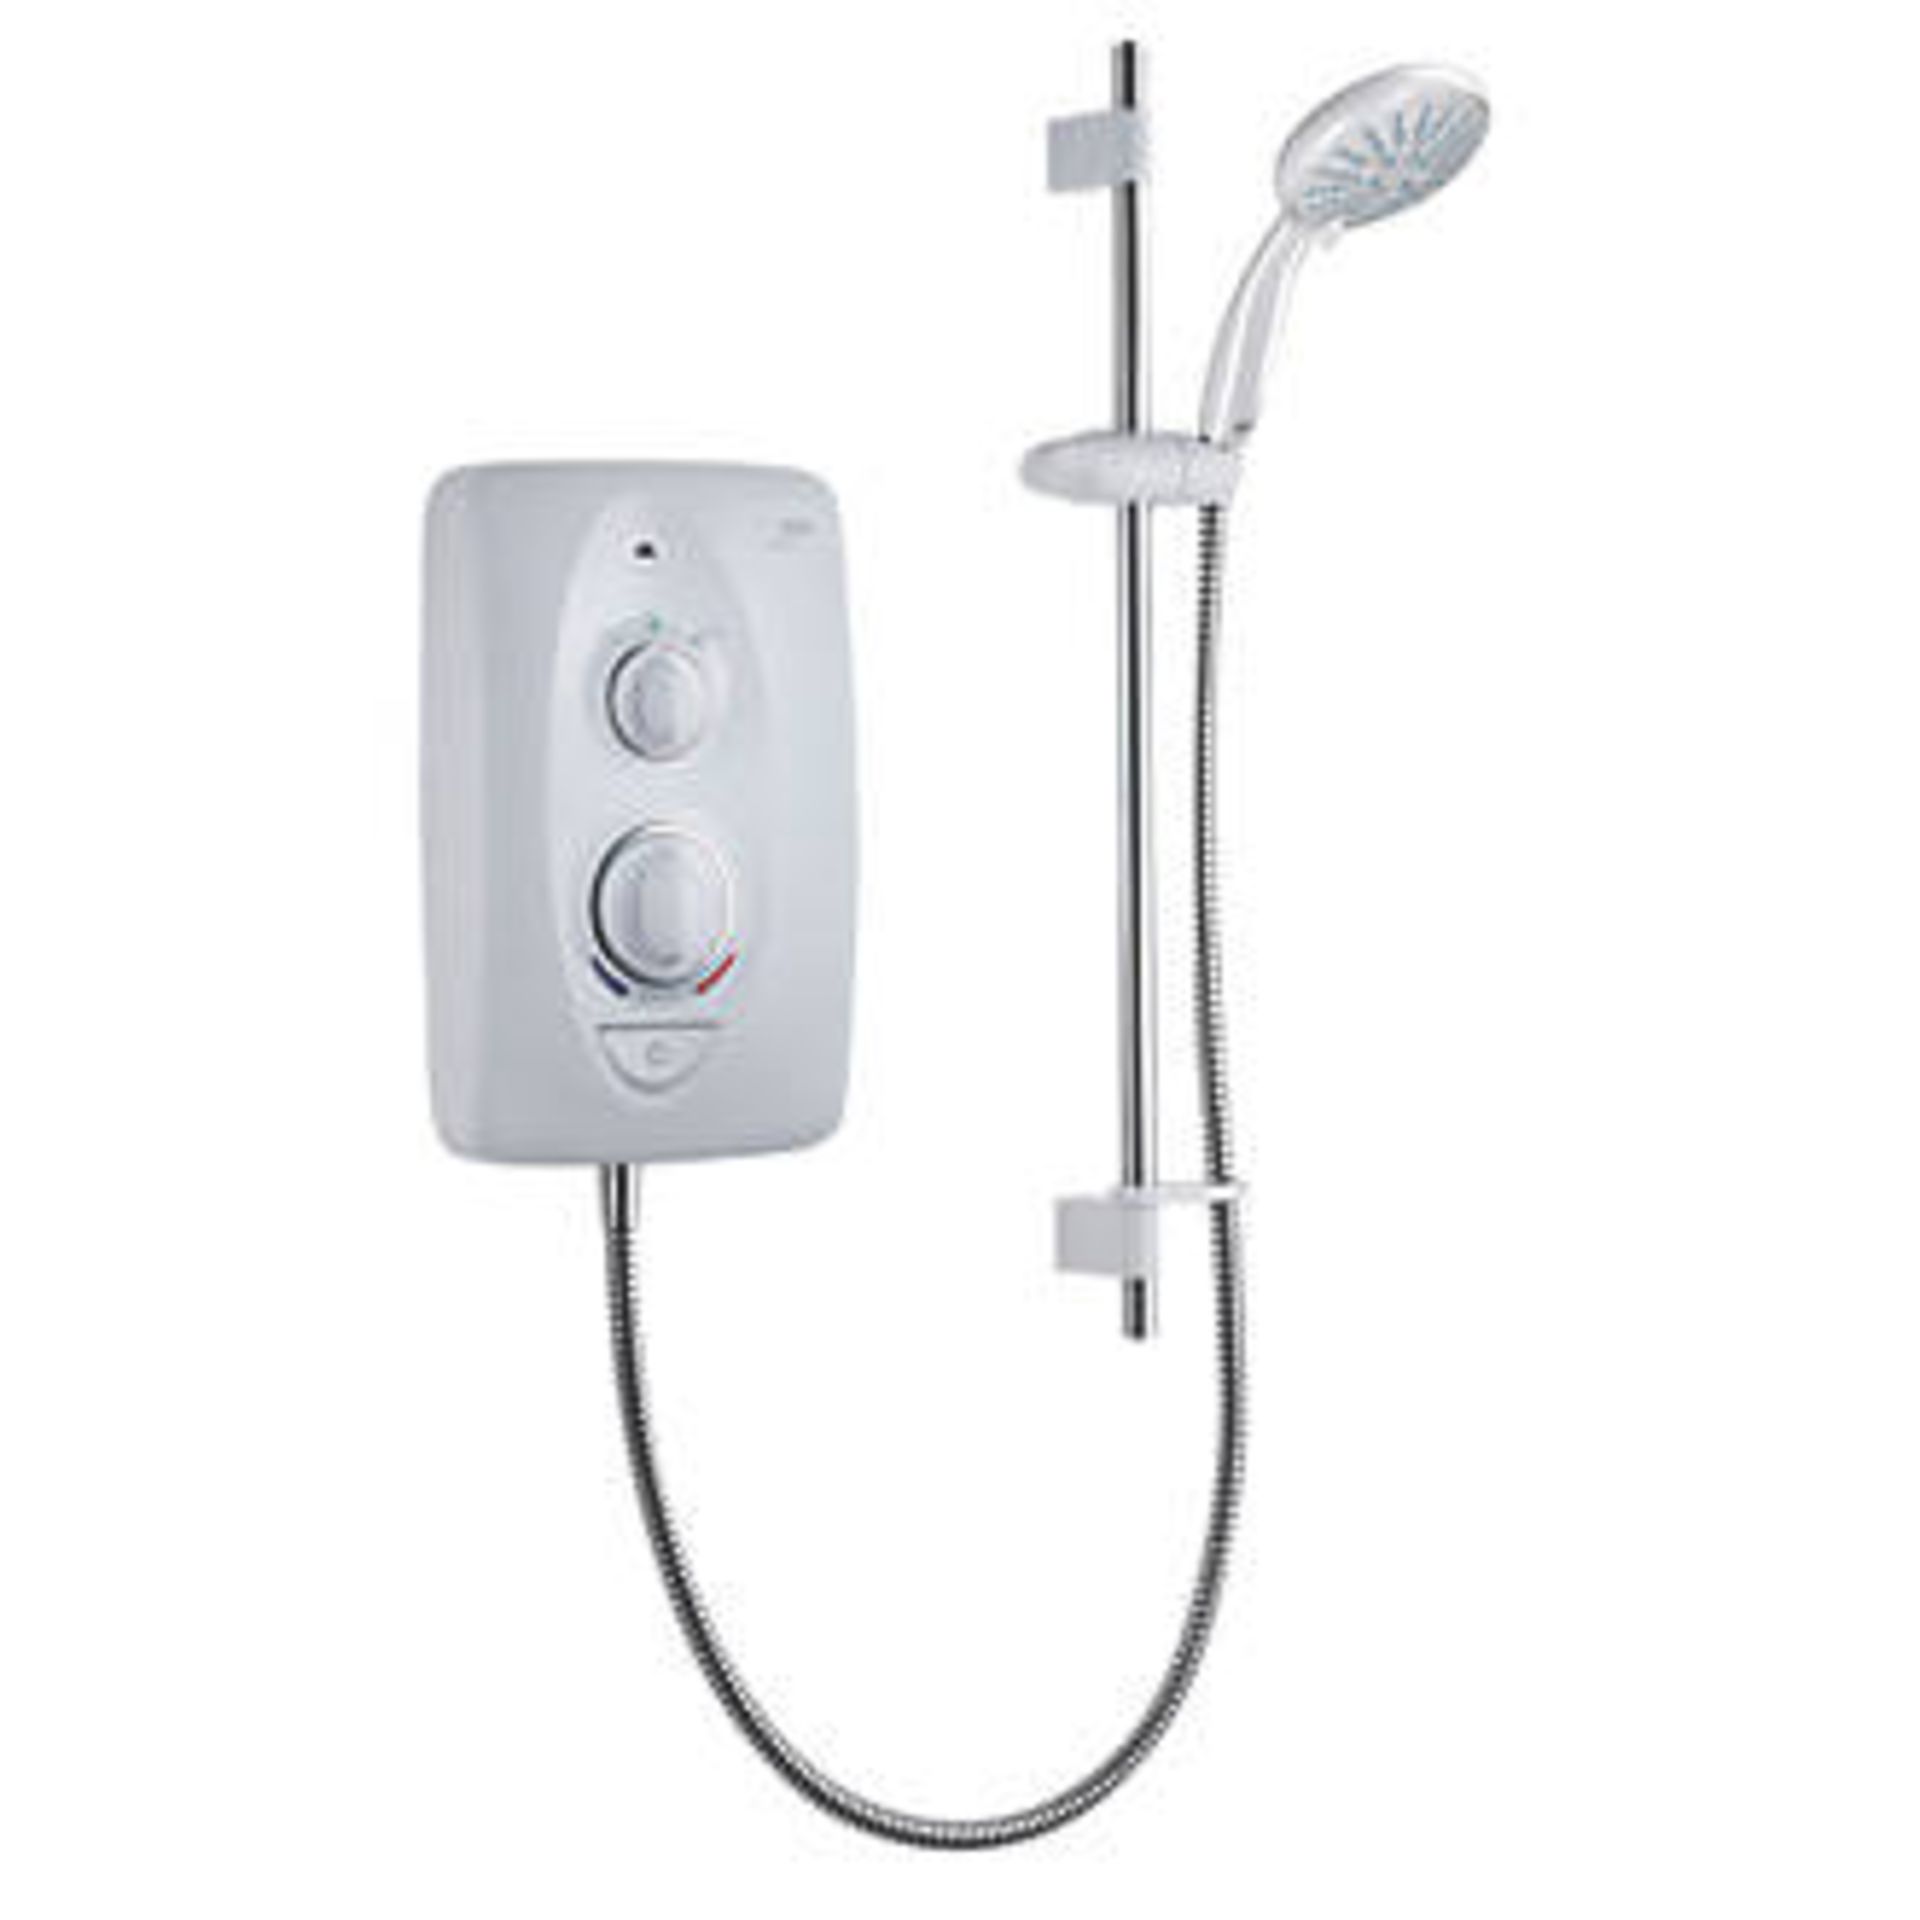 (XL66) Mira Sprint Multi-Fit White 9.5kW Electric Shower. Easy to fit electric shower with pres... - Image 2 of 4